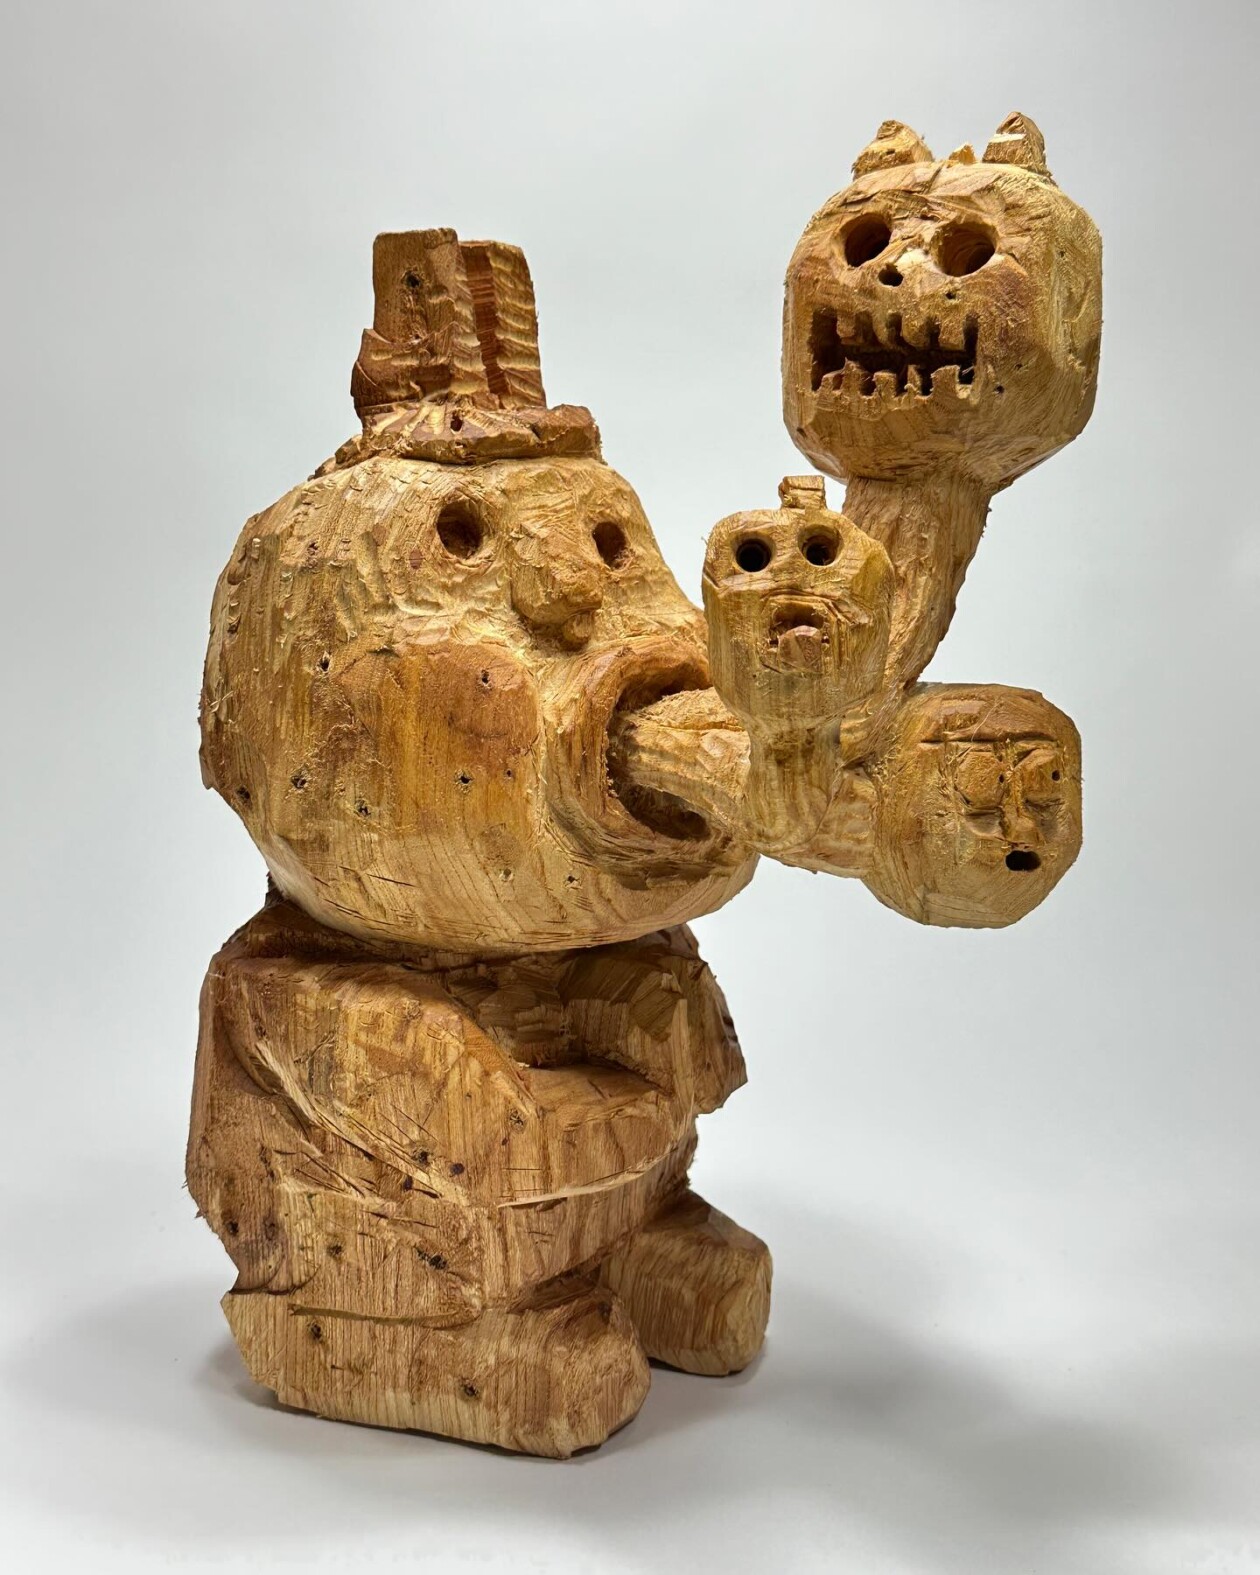 The Enchanting World Of Hirosuke Yabe's Wooden Beings (7)